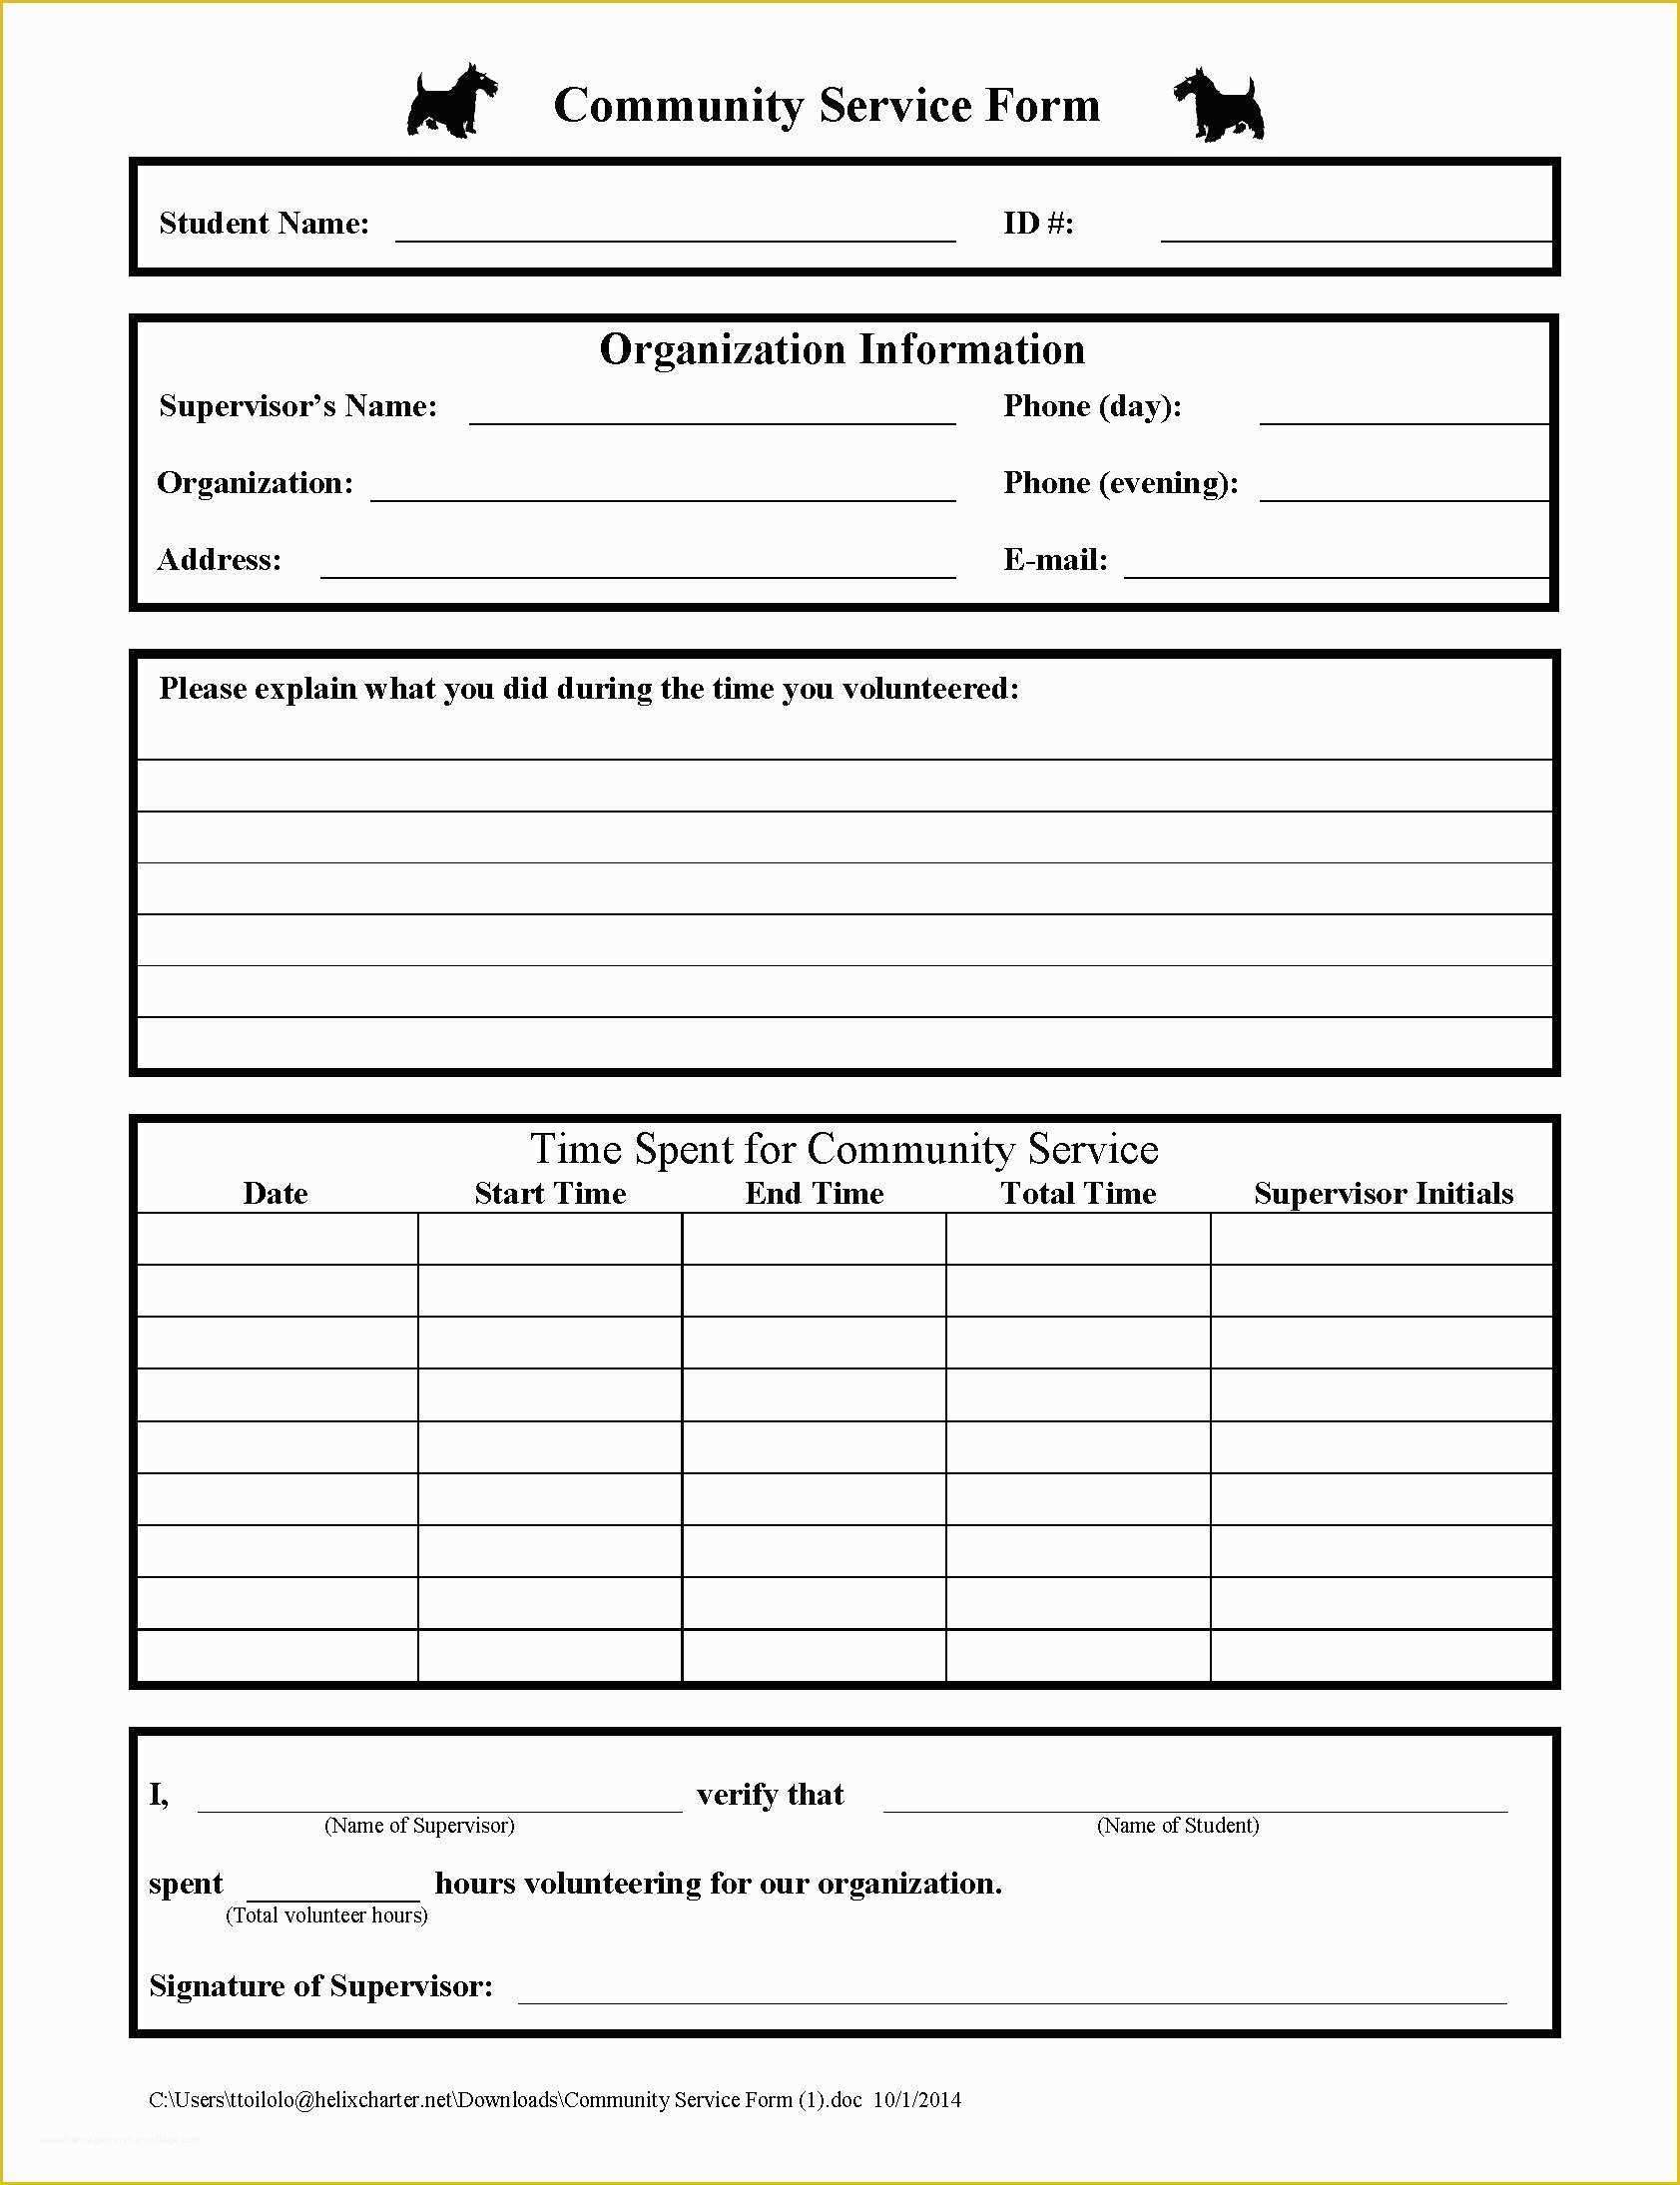 Free Community Service form Template Of form Templatesommunity Service forms Martial Arts